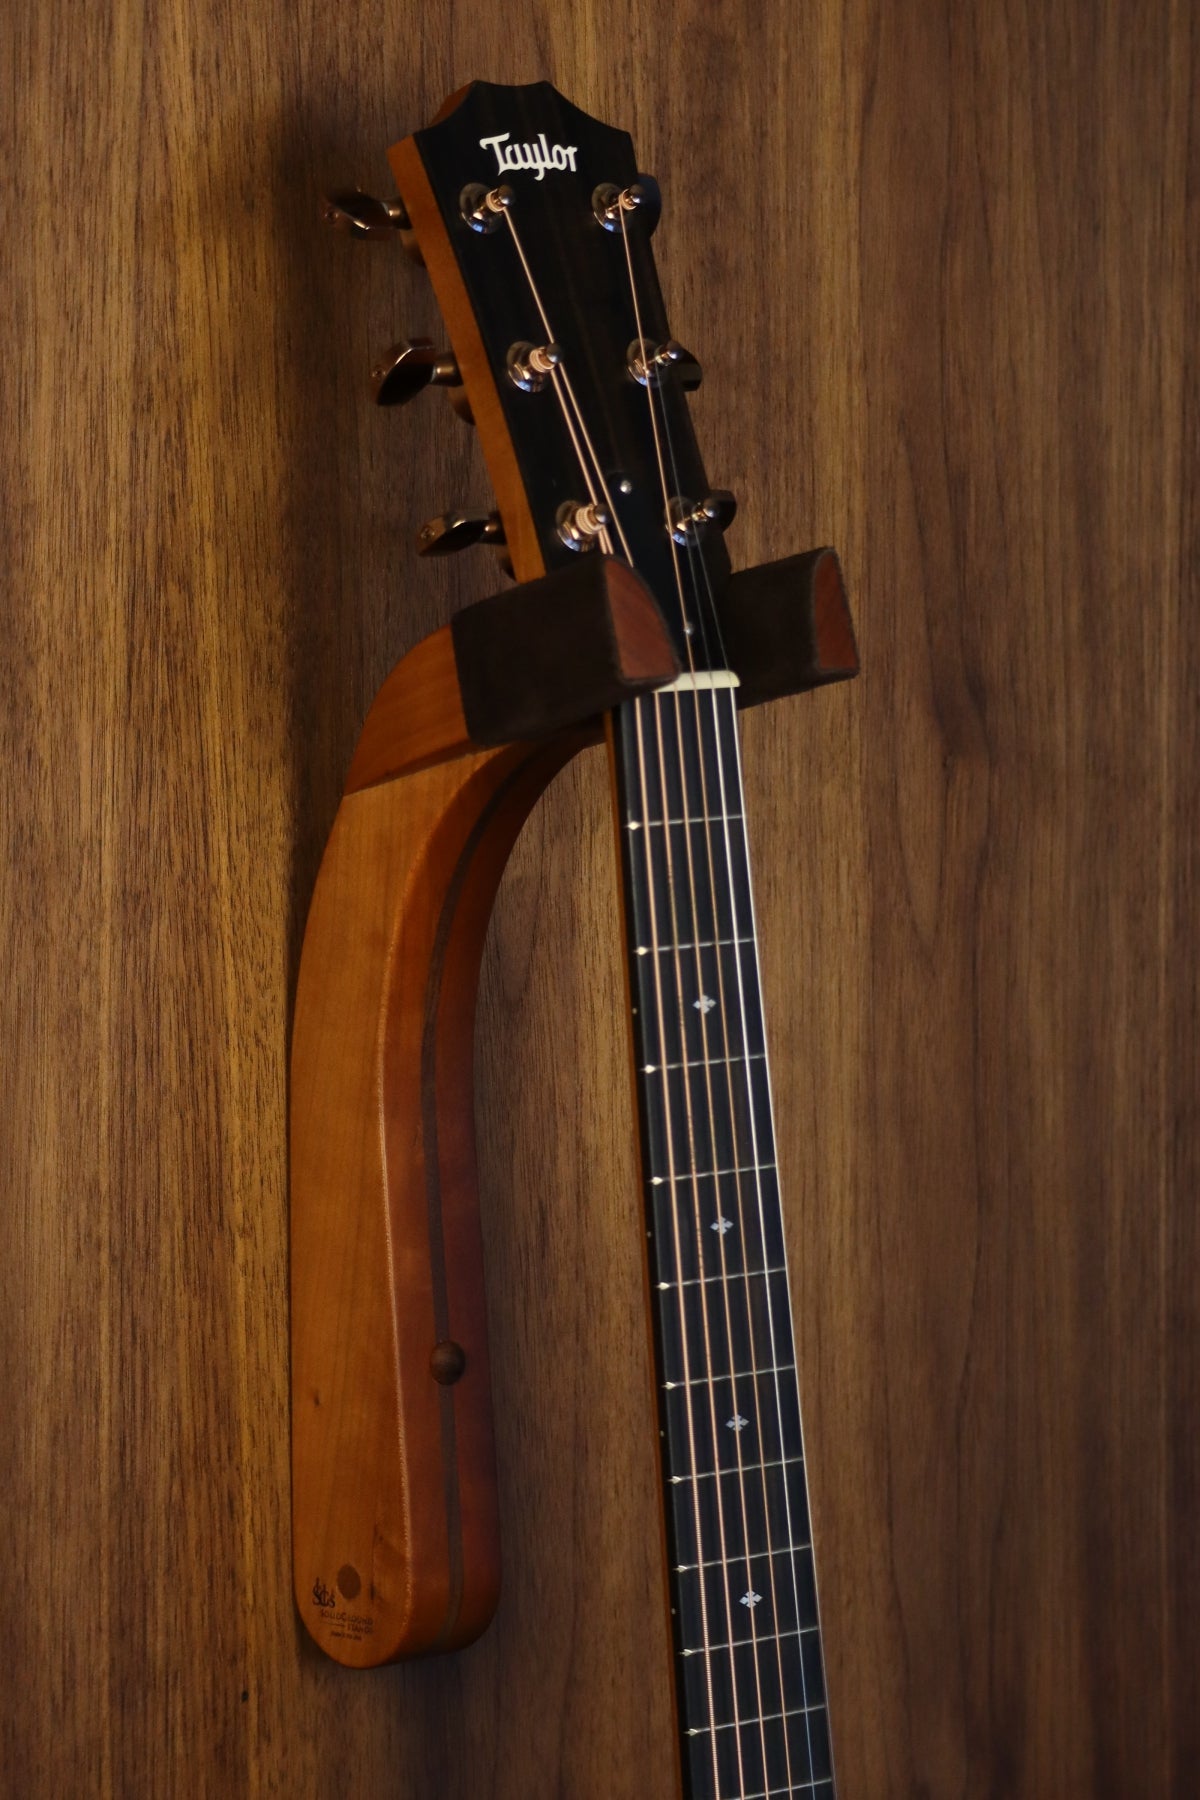 Cherry and walnut wood guitar wall mount hanger installed on paneled wall with Taylor guitar